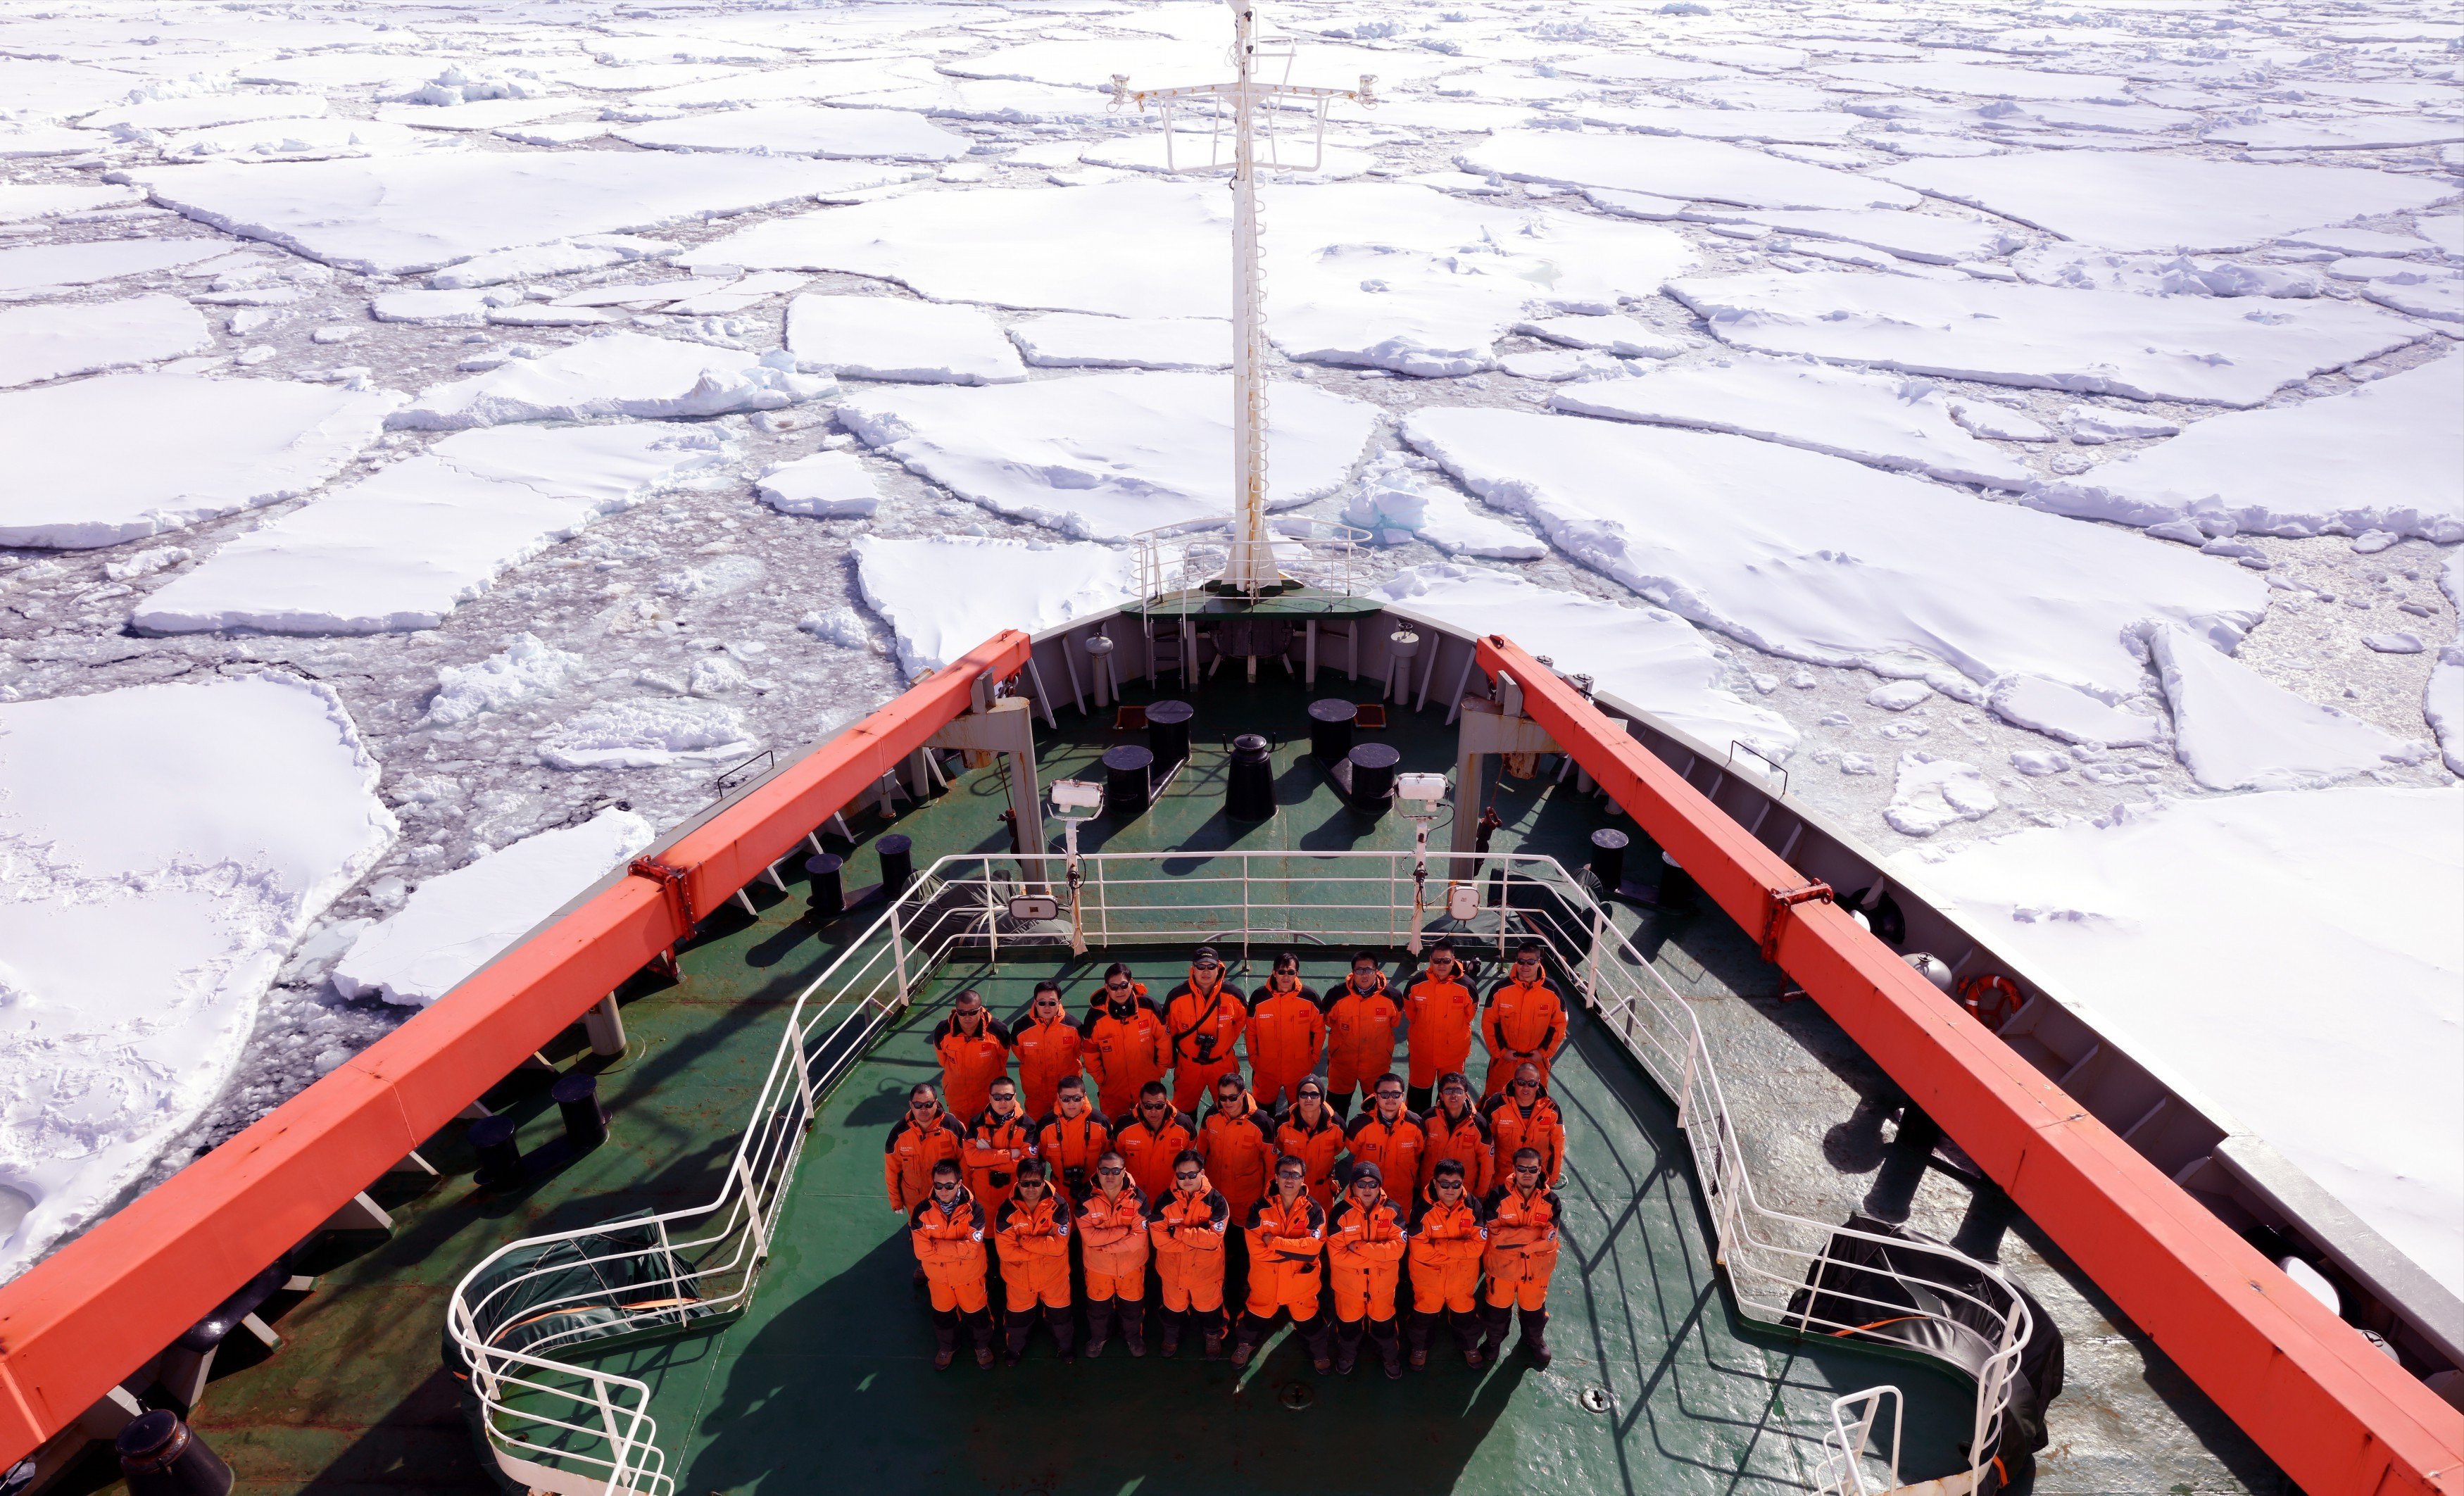 Members of China's 34th Antarctic expedition pose on the deck of China's research icebreaker Xue Long (Snow Dragon) on January 15. The ship has also been used to make voyages to the Arctic. Photo: Xinhua